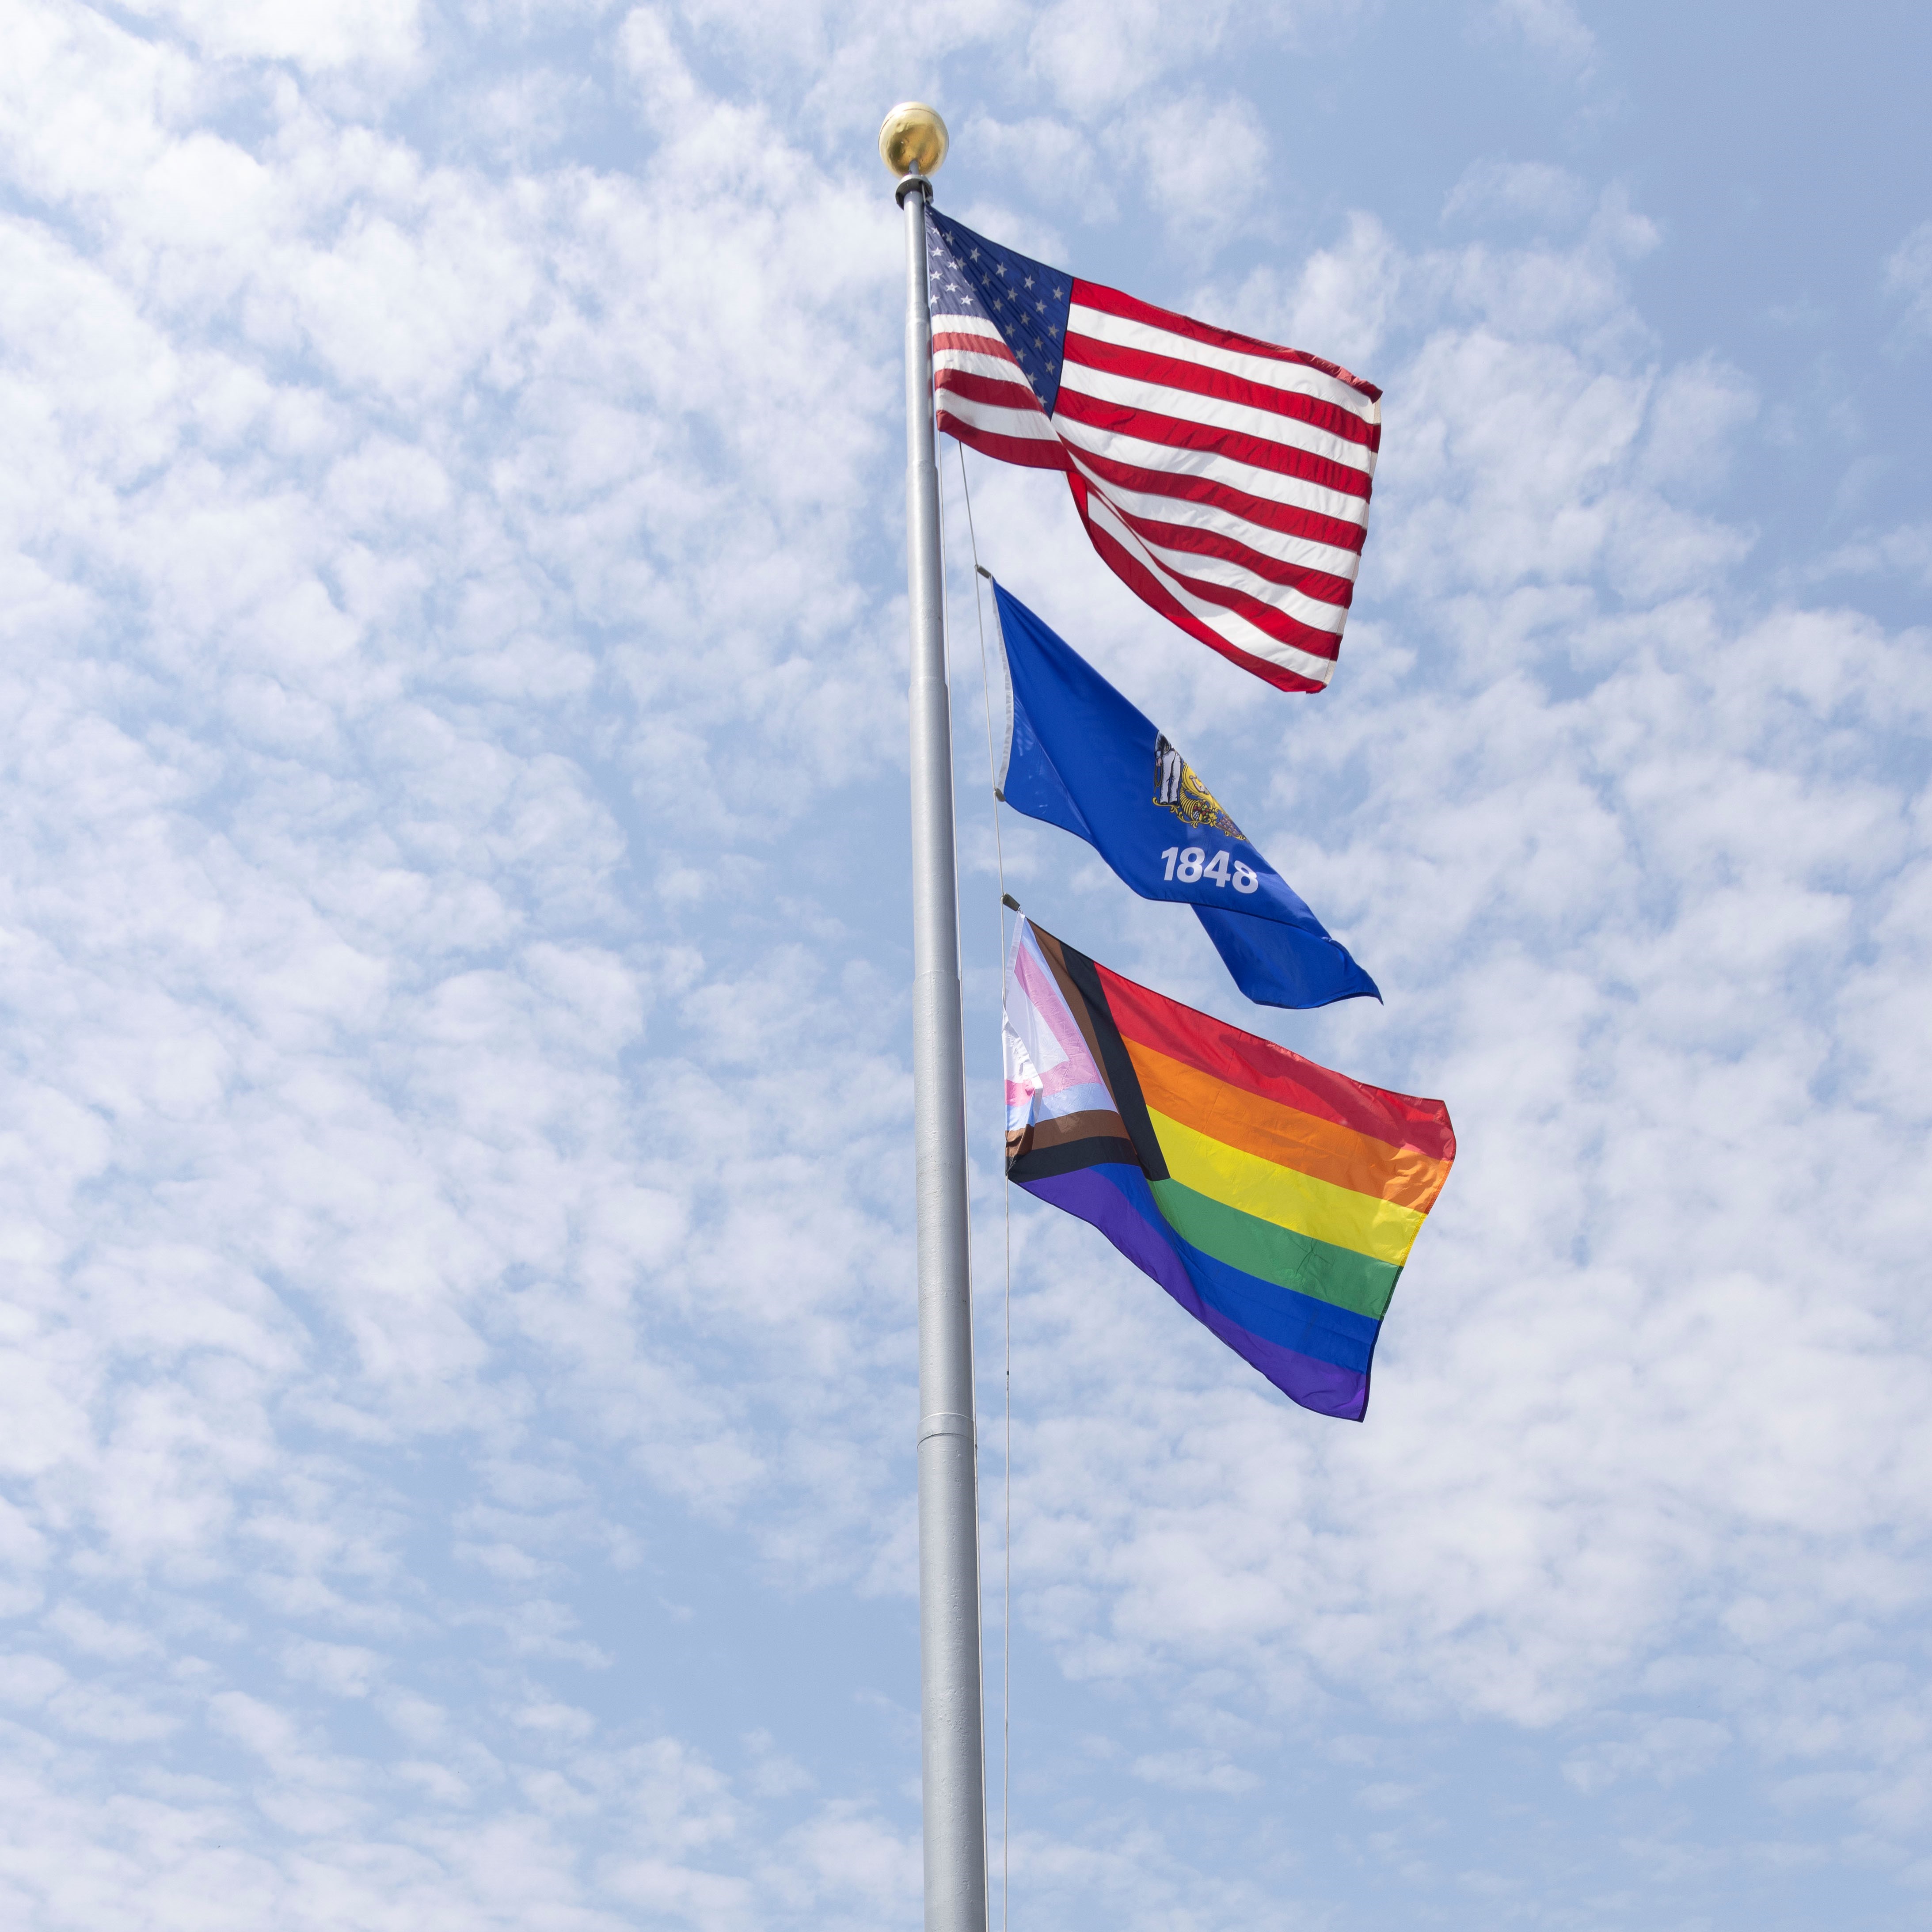 The American flag, the Wisconsin state flag and the Progress Pride flag fly over the Wisconsin state capitol.